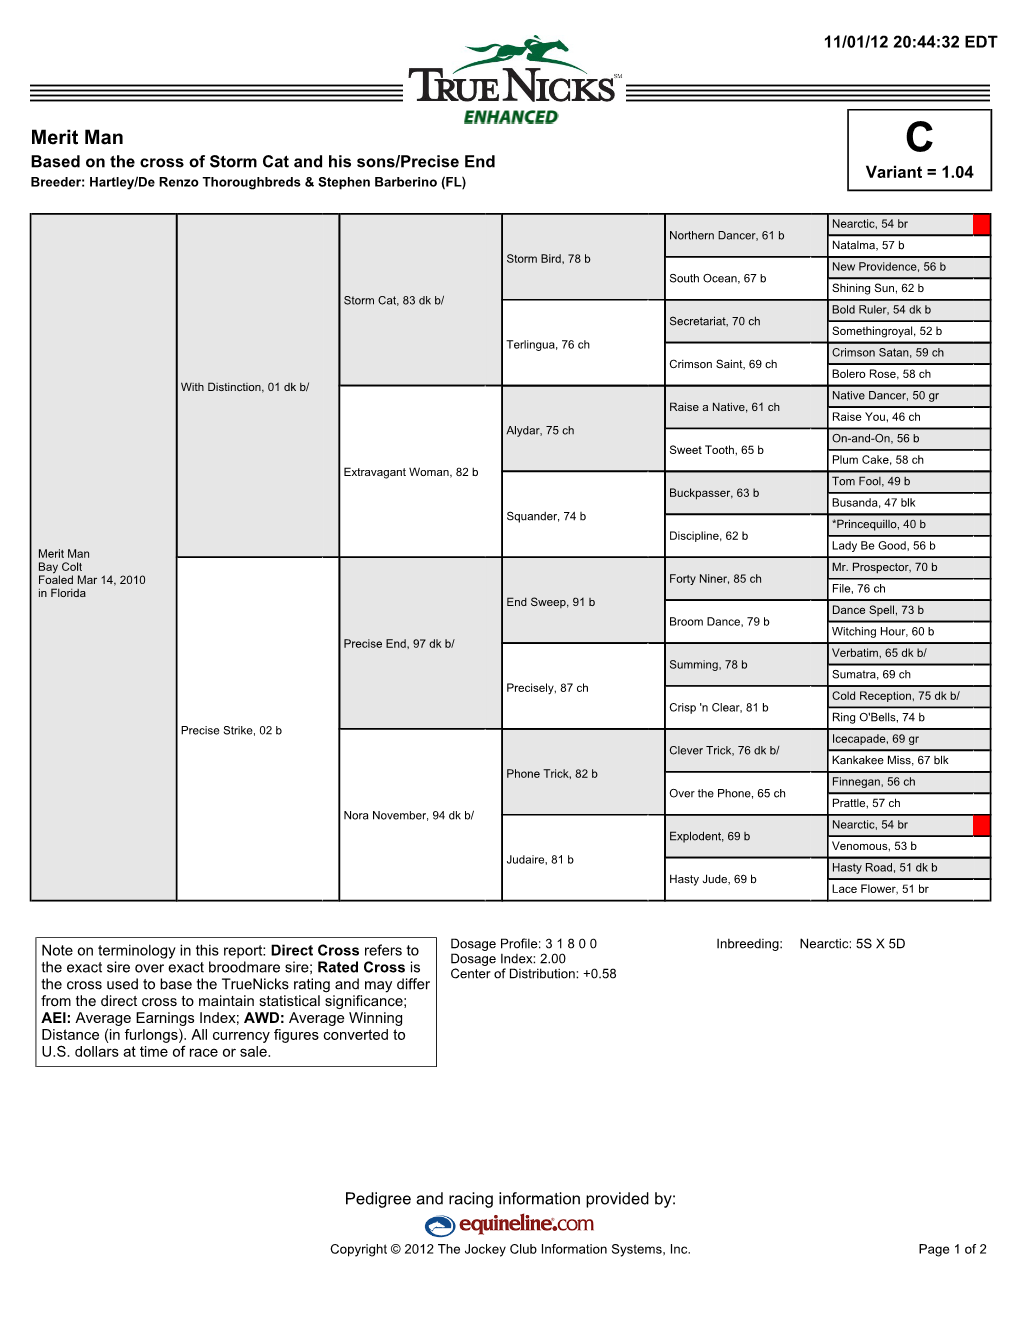 Merit Man C Based on the Cross of Storm Cat and His Sons/Precise End Variant = 1.04 Breeder: Hartley/De Renzo Thoroughbreds & Stephen Barberino (FL)